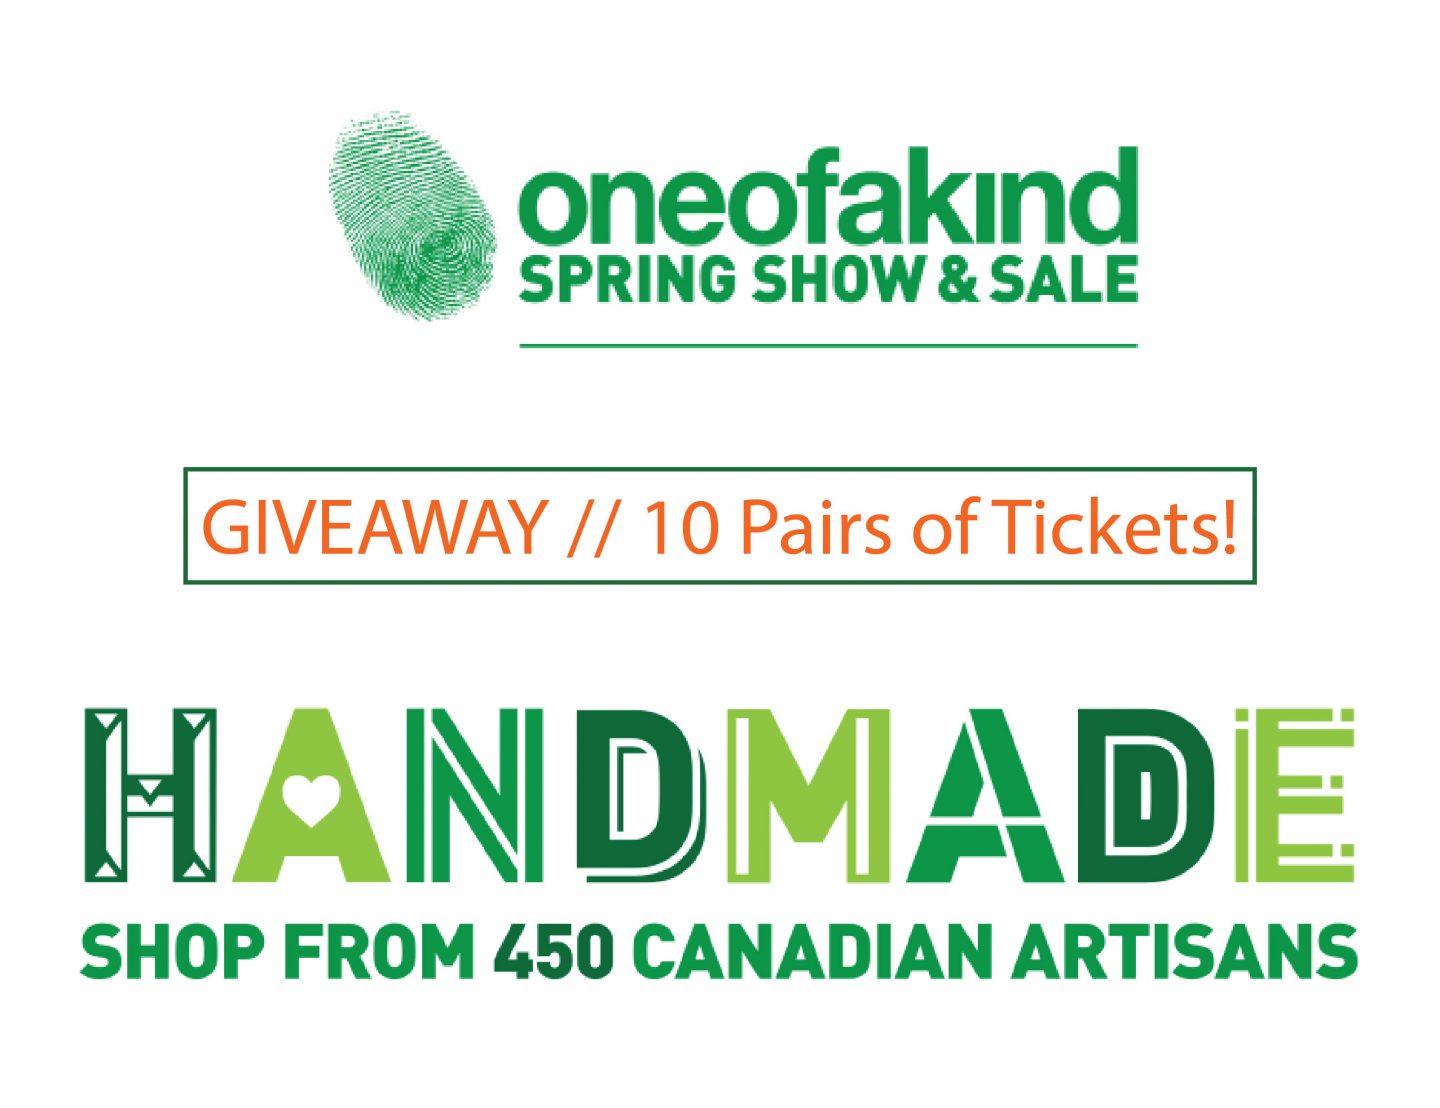 Giveaway // 10 Pairs of Tickets to the One Of A Kind Show in Toronto